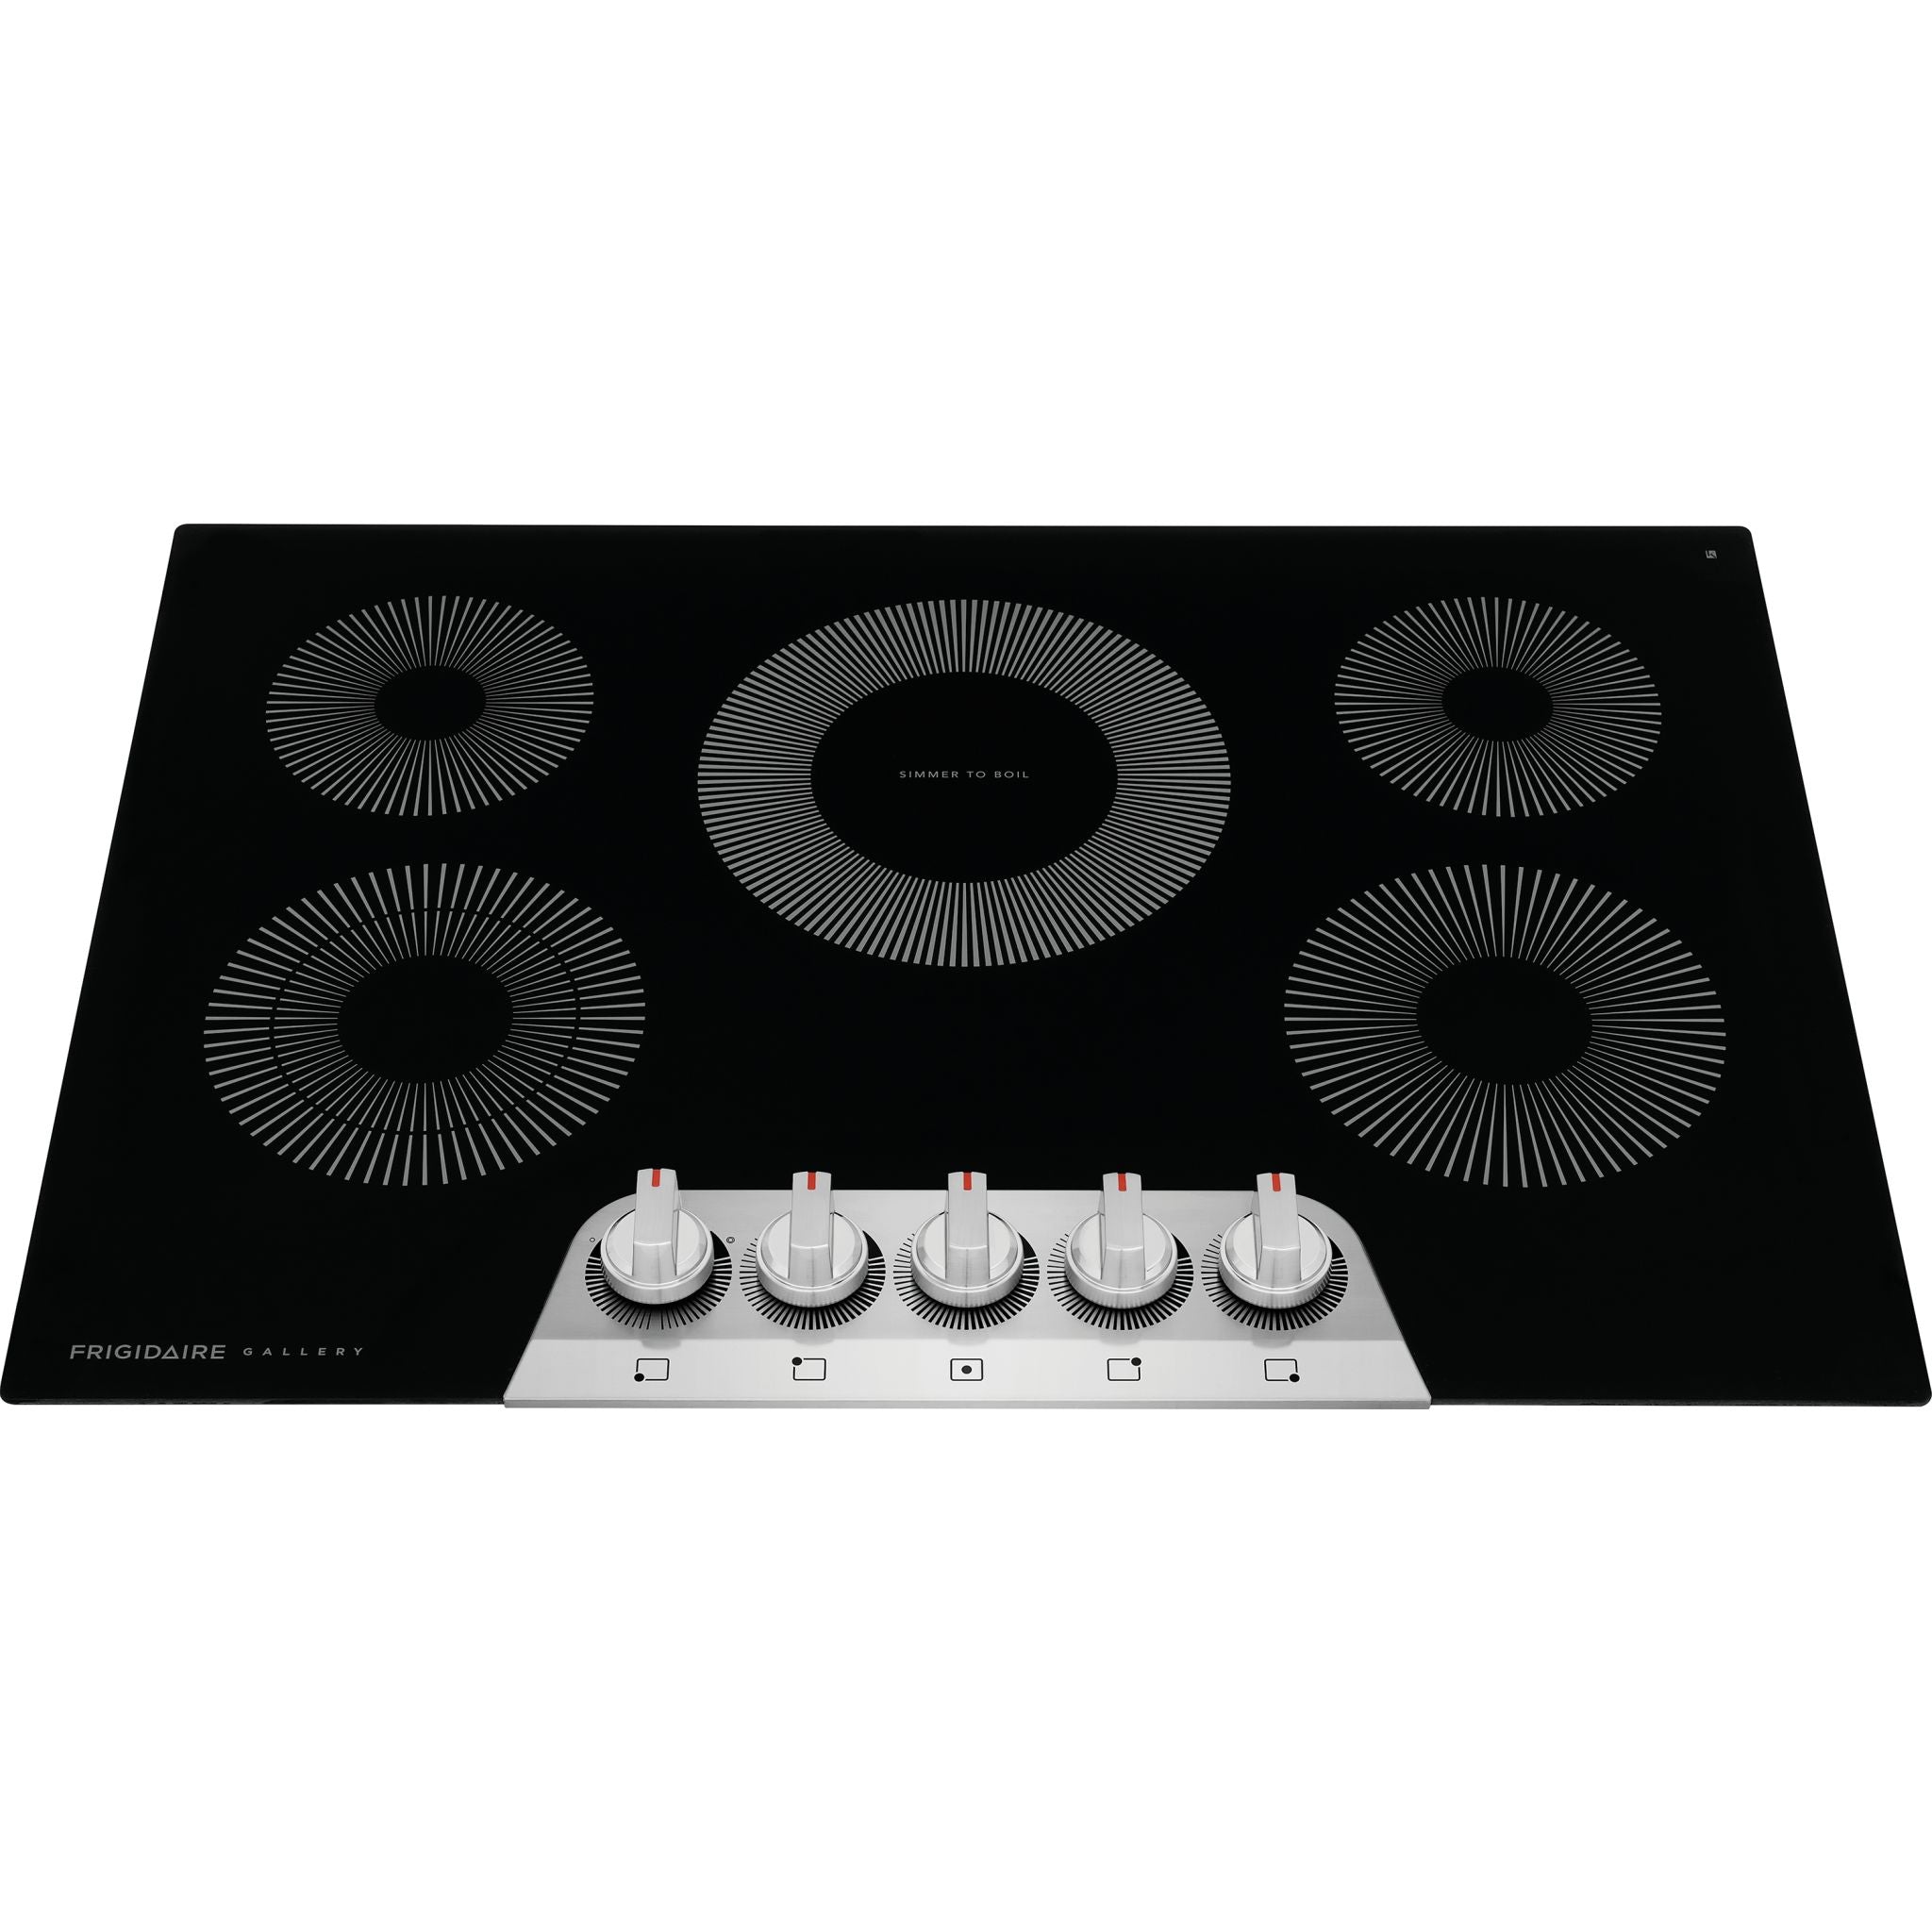 Frigidaire Gallery, Frigidaire Gallery 30" Cooktop (GCCE3070AS) - Stainless Steel